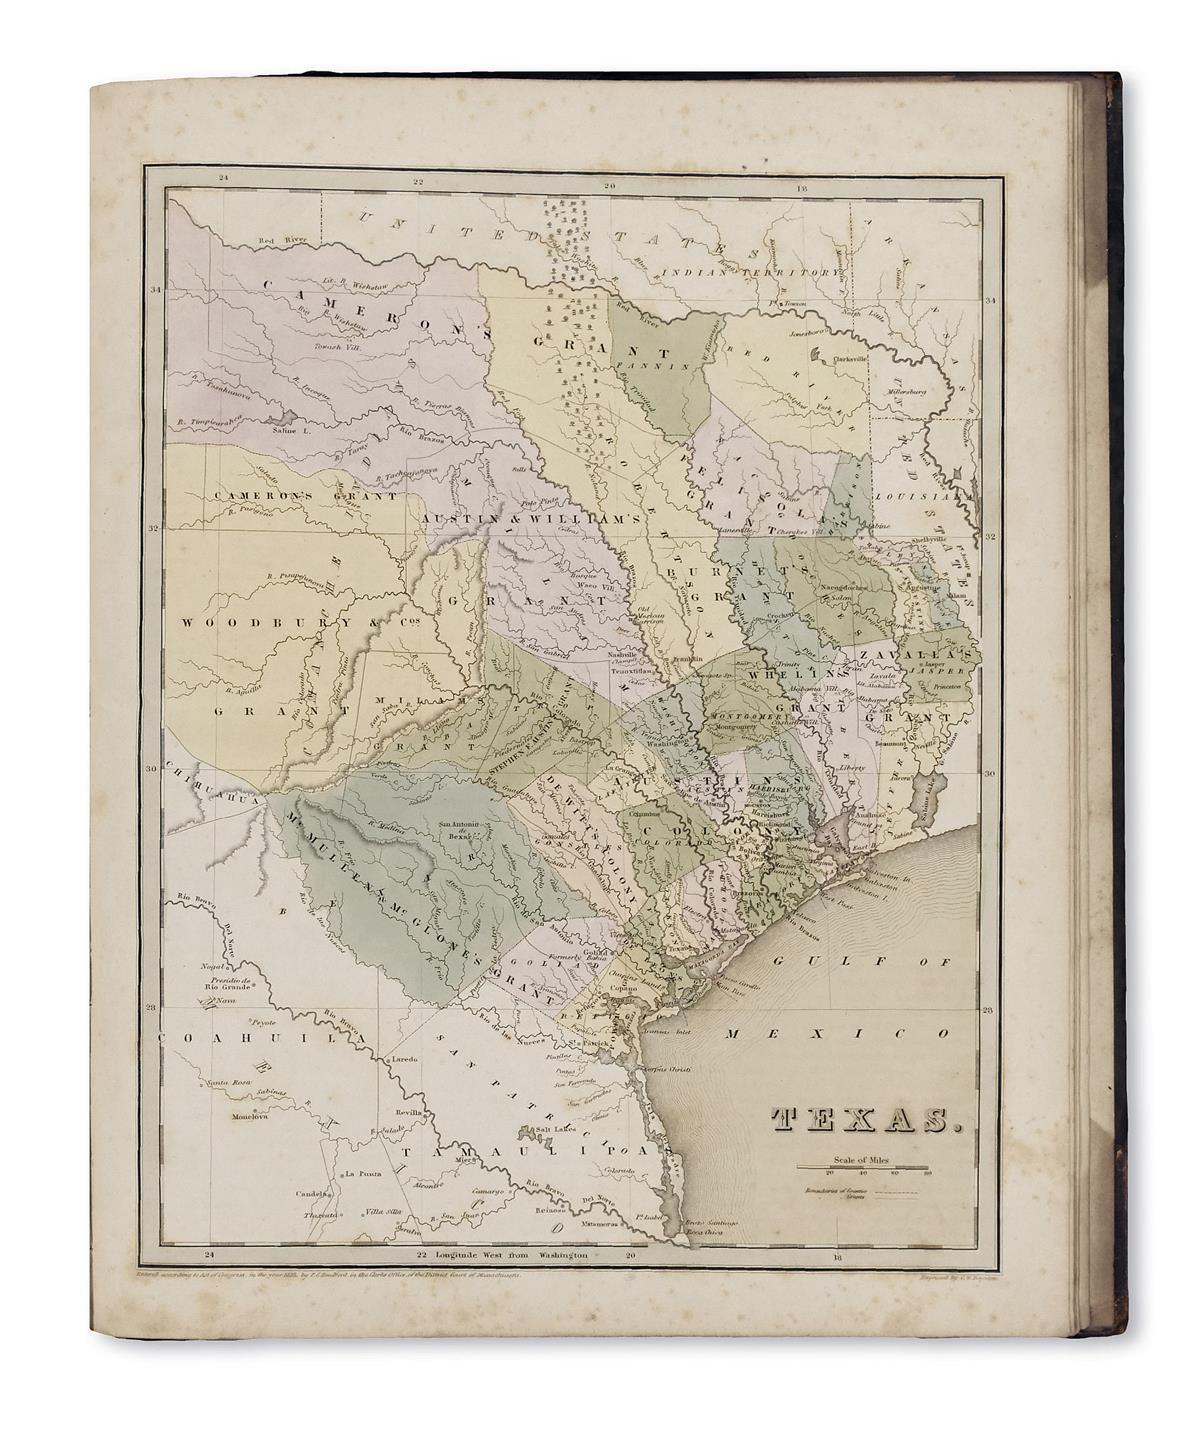 BRADFORD, THOMAS GAMALIEL. An Illustrated Atlas, Geographical, Statistical, and Historical, of the United States,